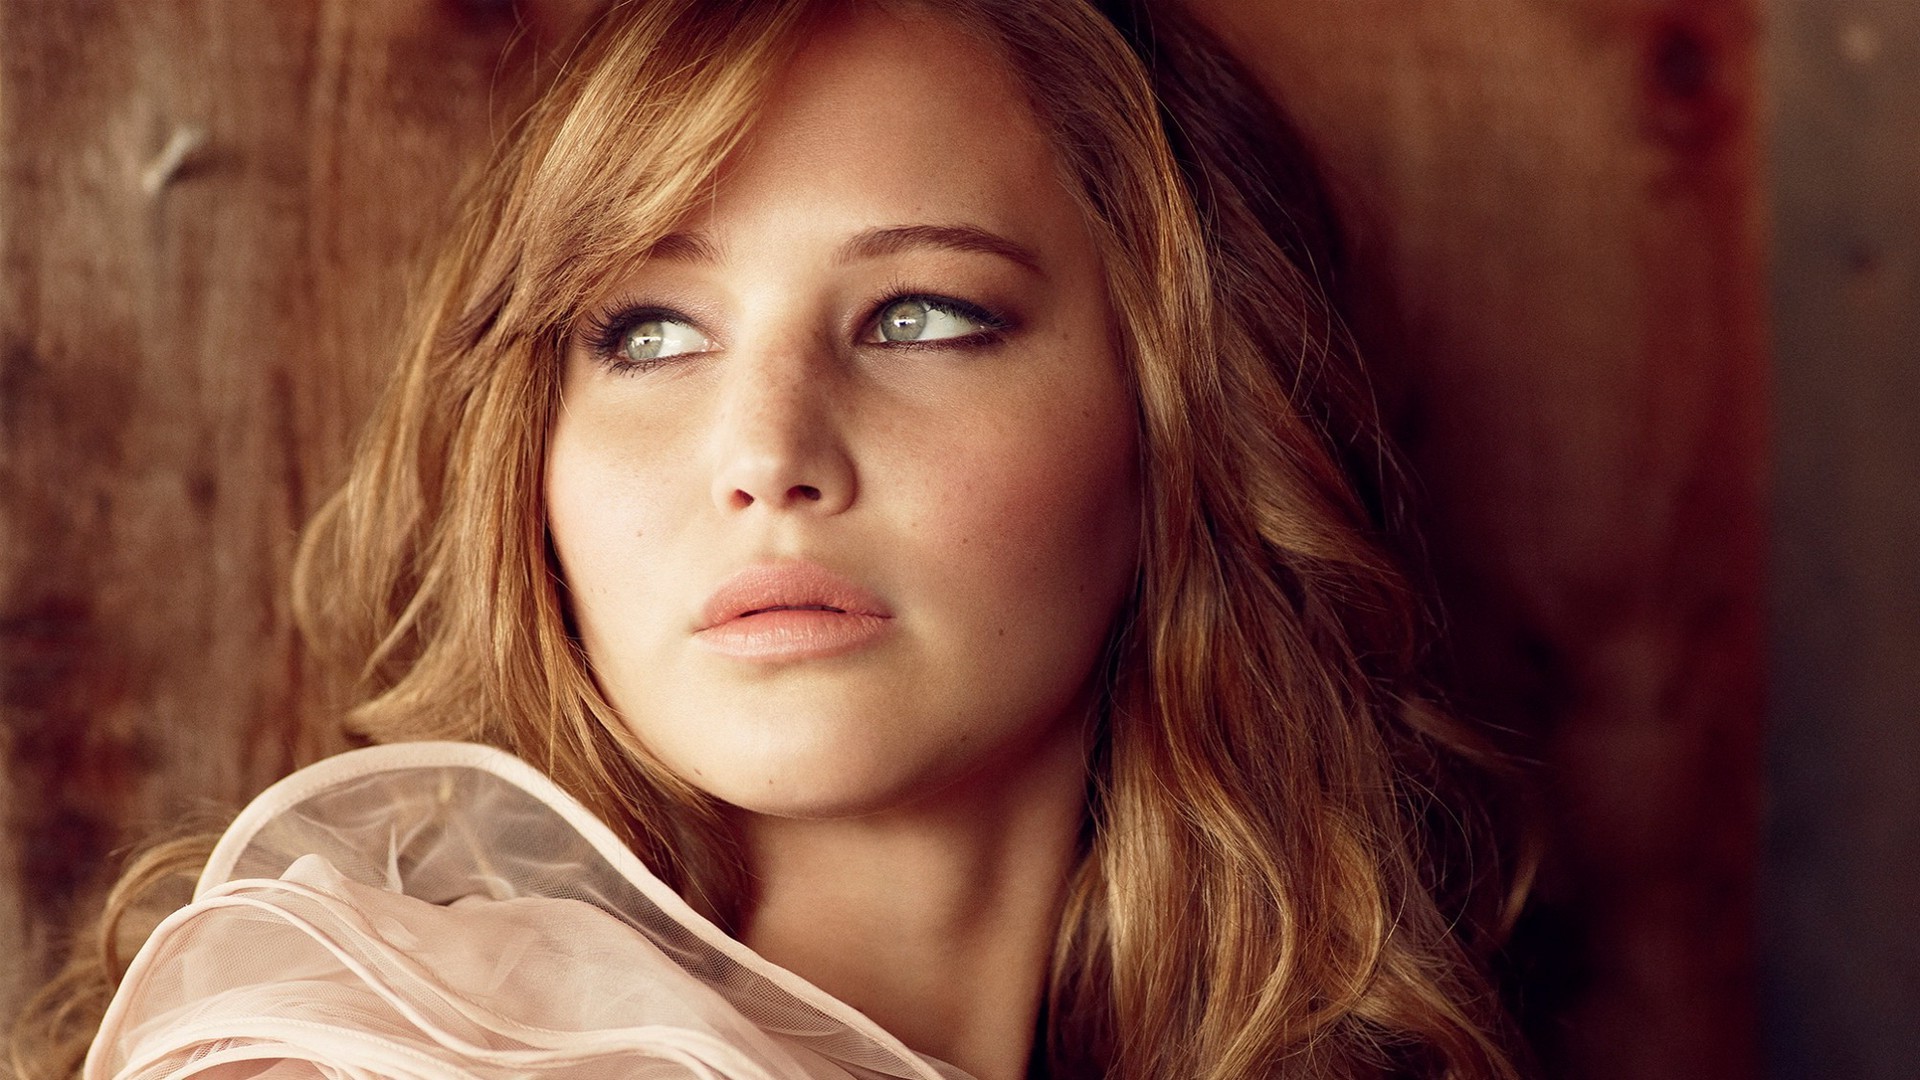 Hunger Games' Jennifer Lawrence named FHM's sexiest woman alive in 2014 | Blastr